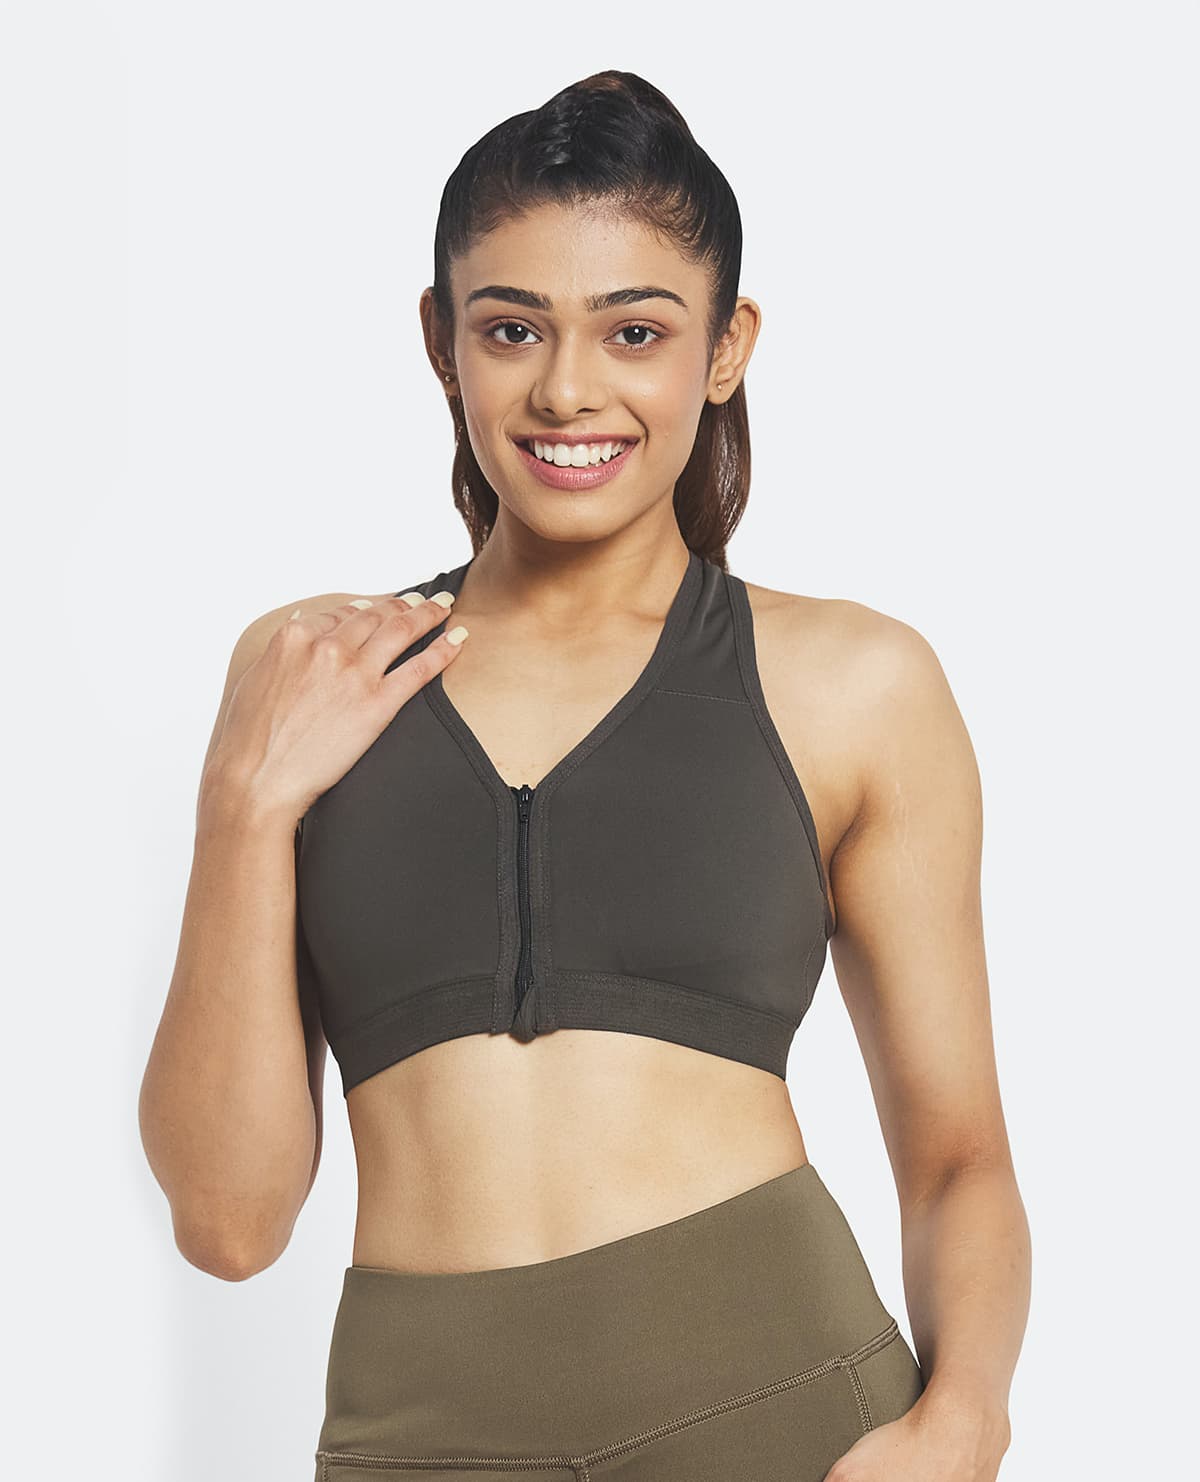 Low to Mid Impact Cotton Sports Bra – Kica Active